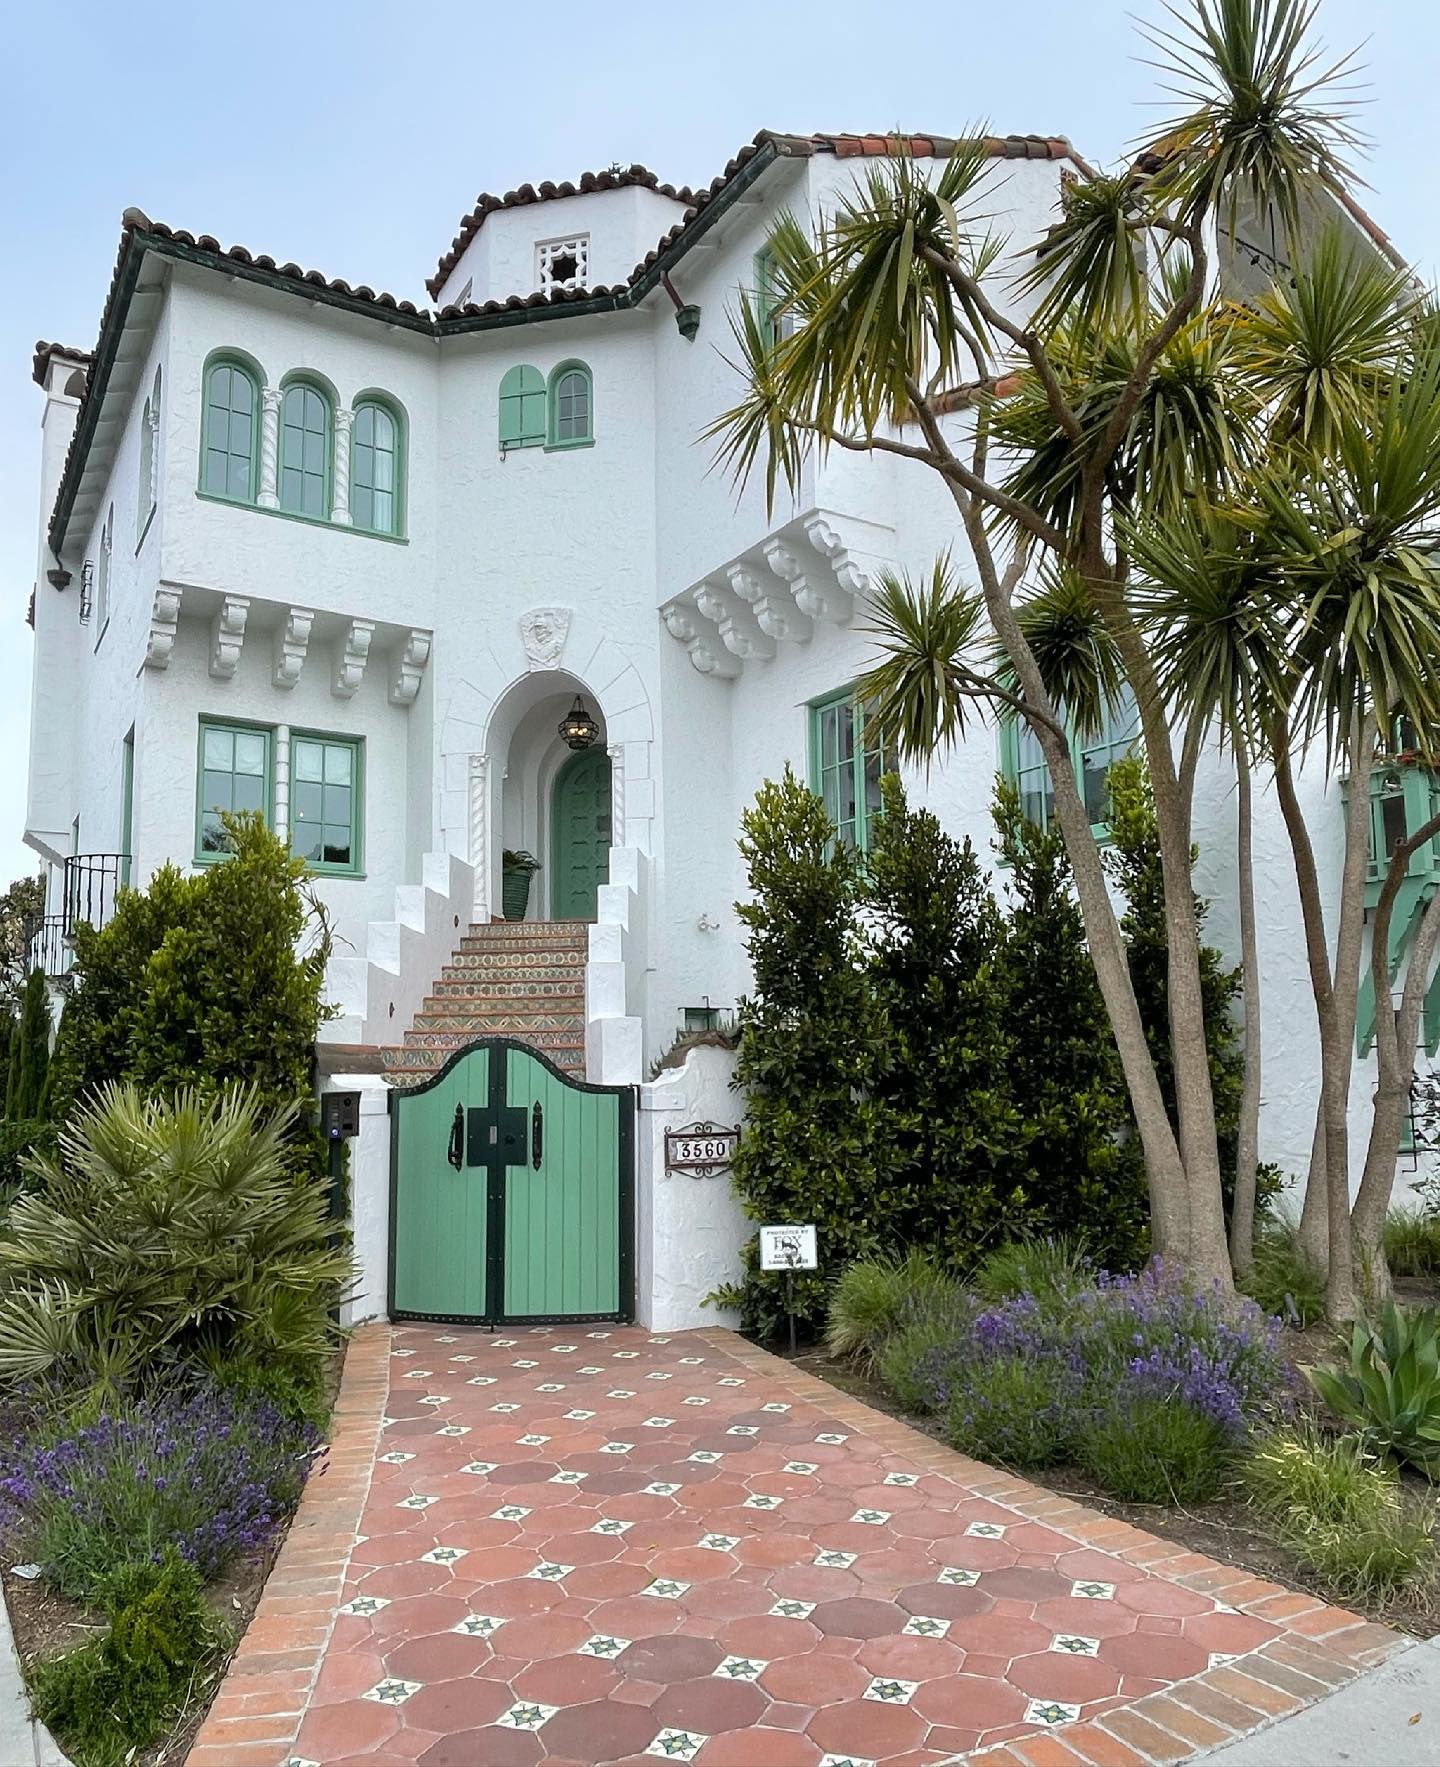 Mediterranean style white house with green accents in the Marina District. Photo by Instagram user @cyanidevision